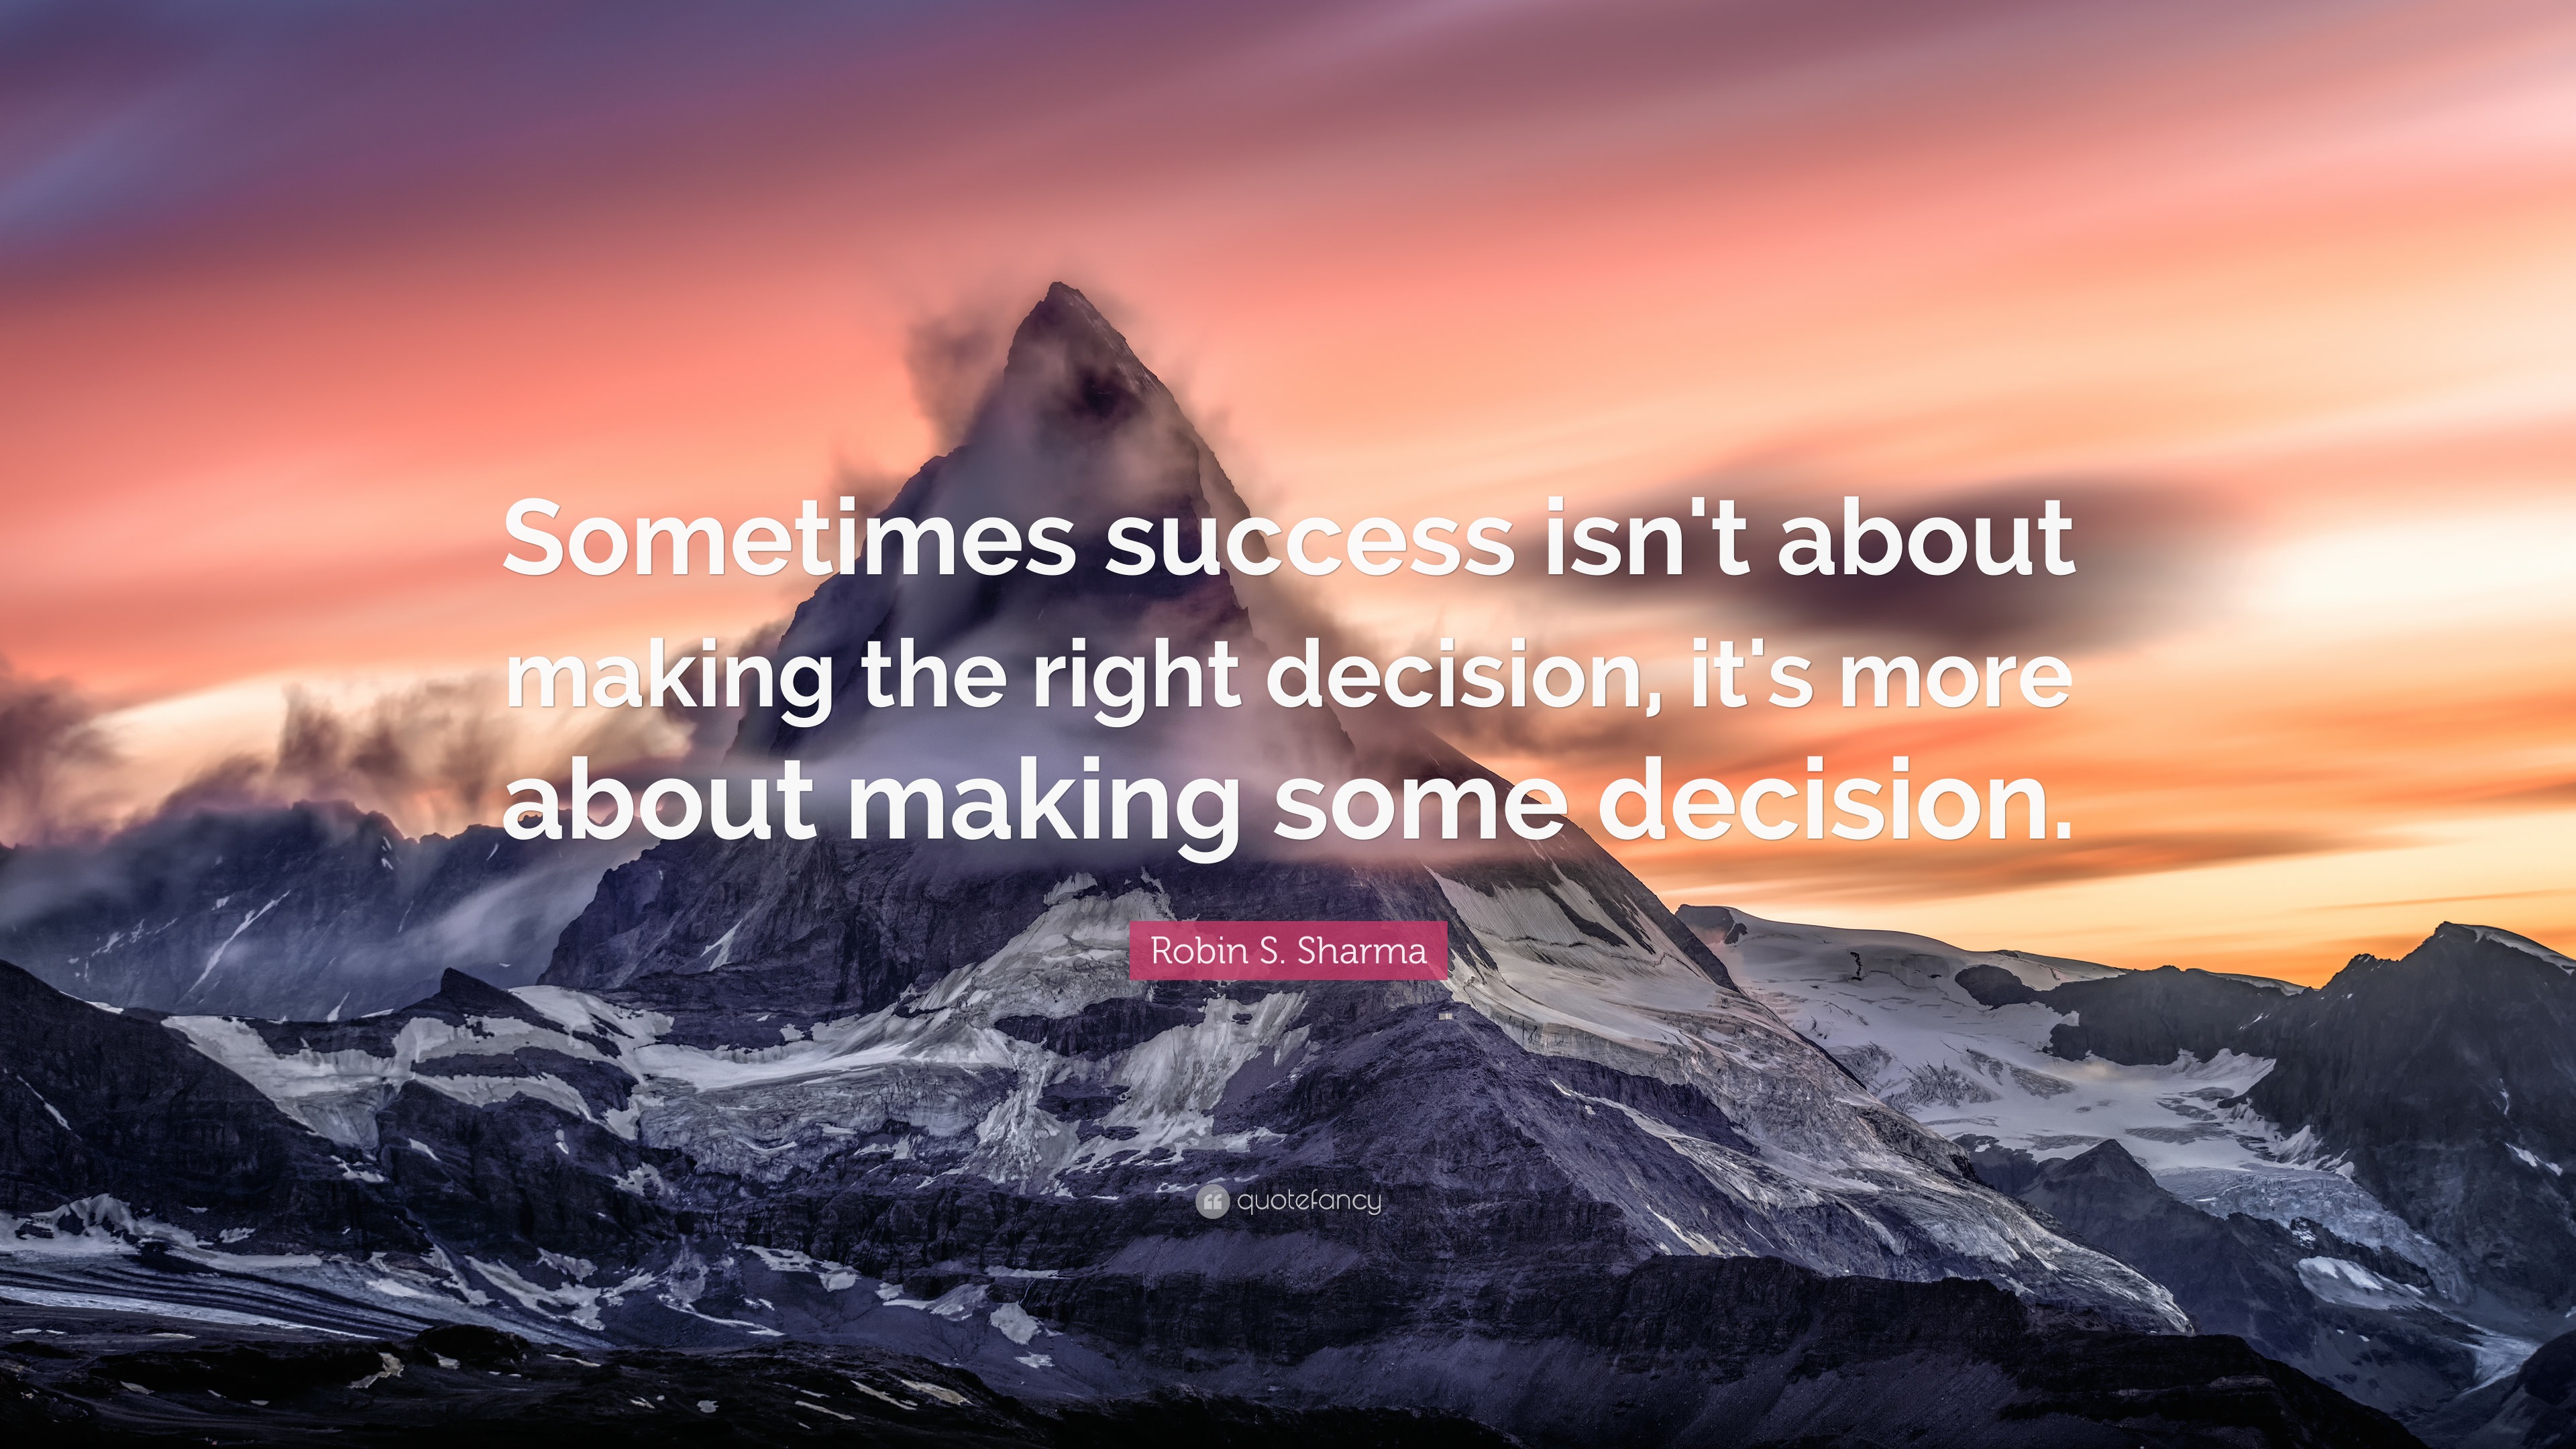 Robin S. Sharma Quote: “Sometimes success isn't about making the right ...